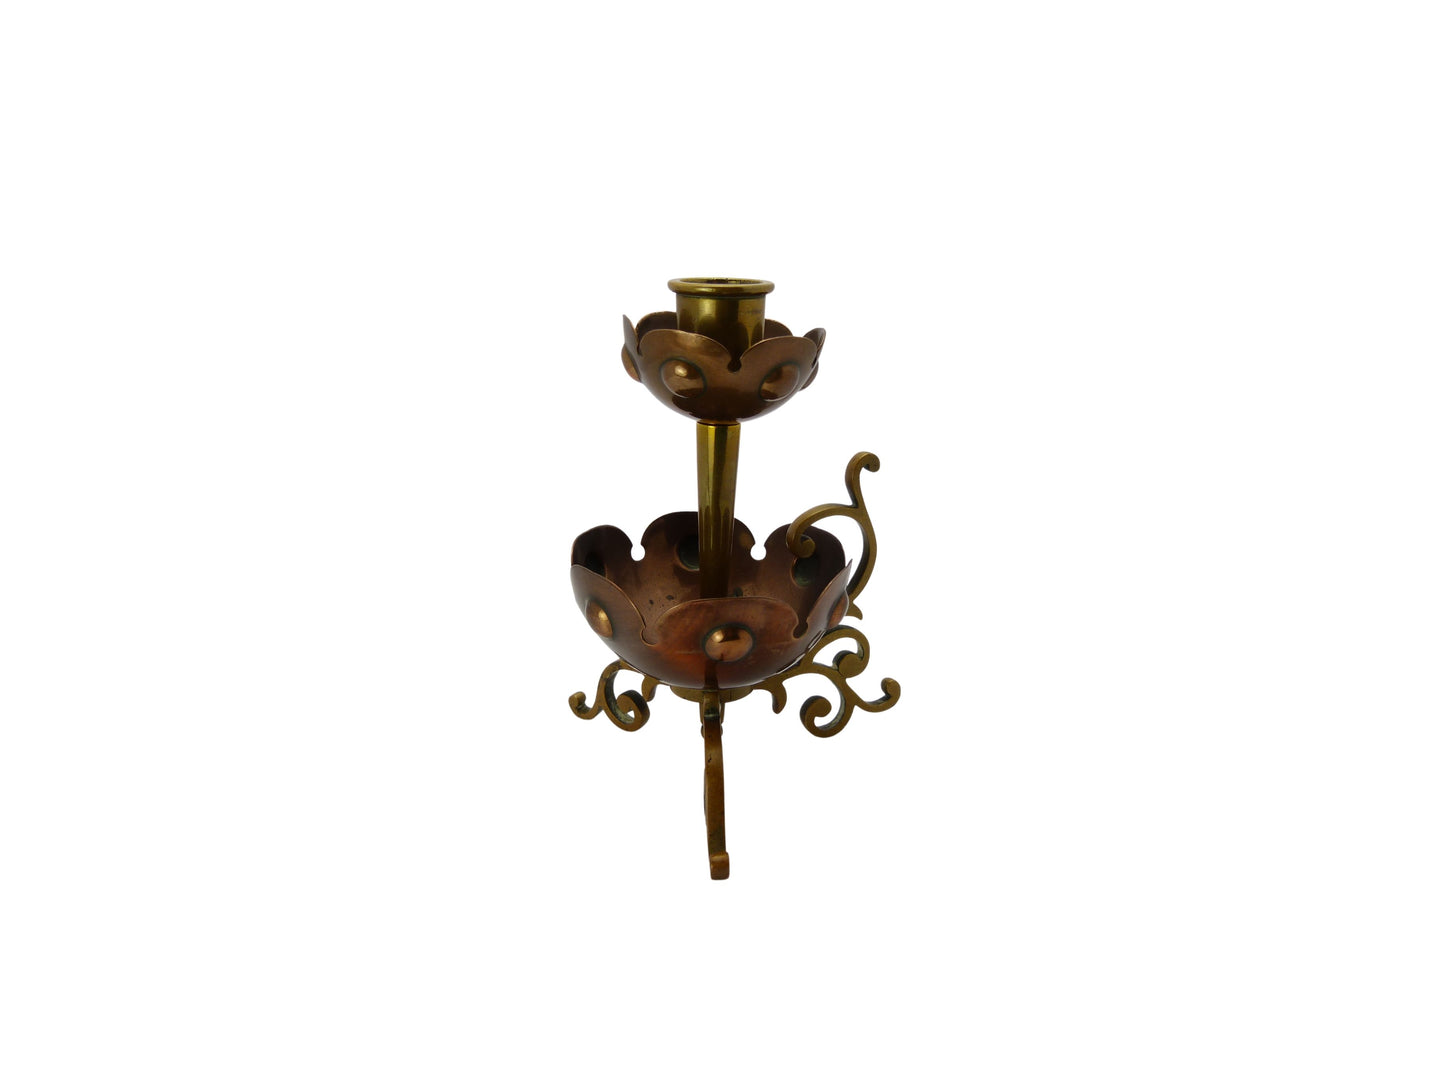 Antique Arts & Crafts Copper and Brass Candle Holder